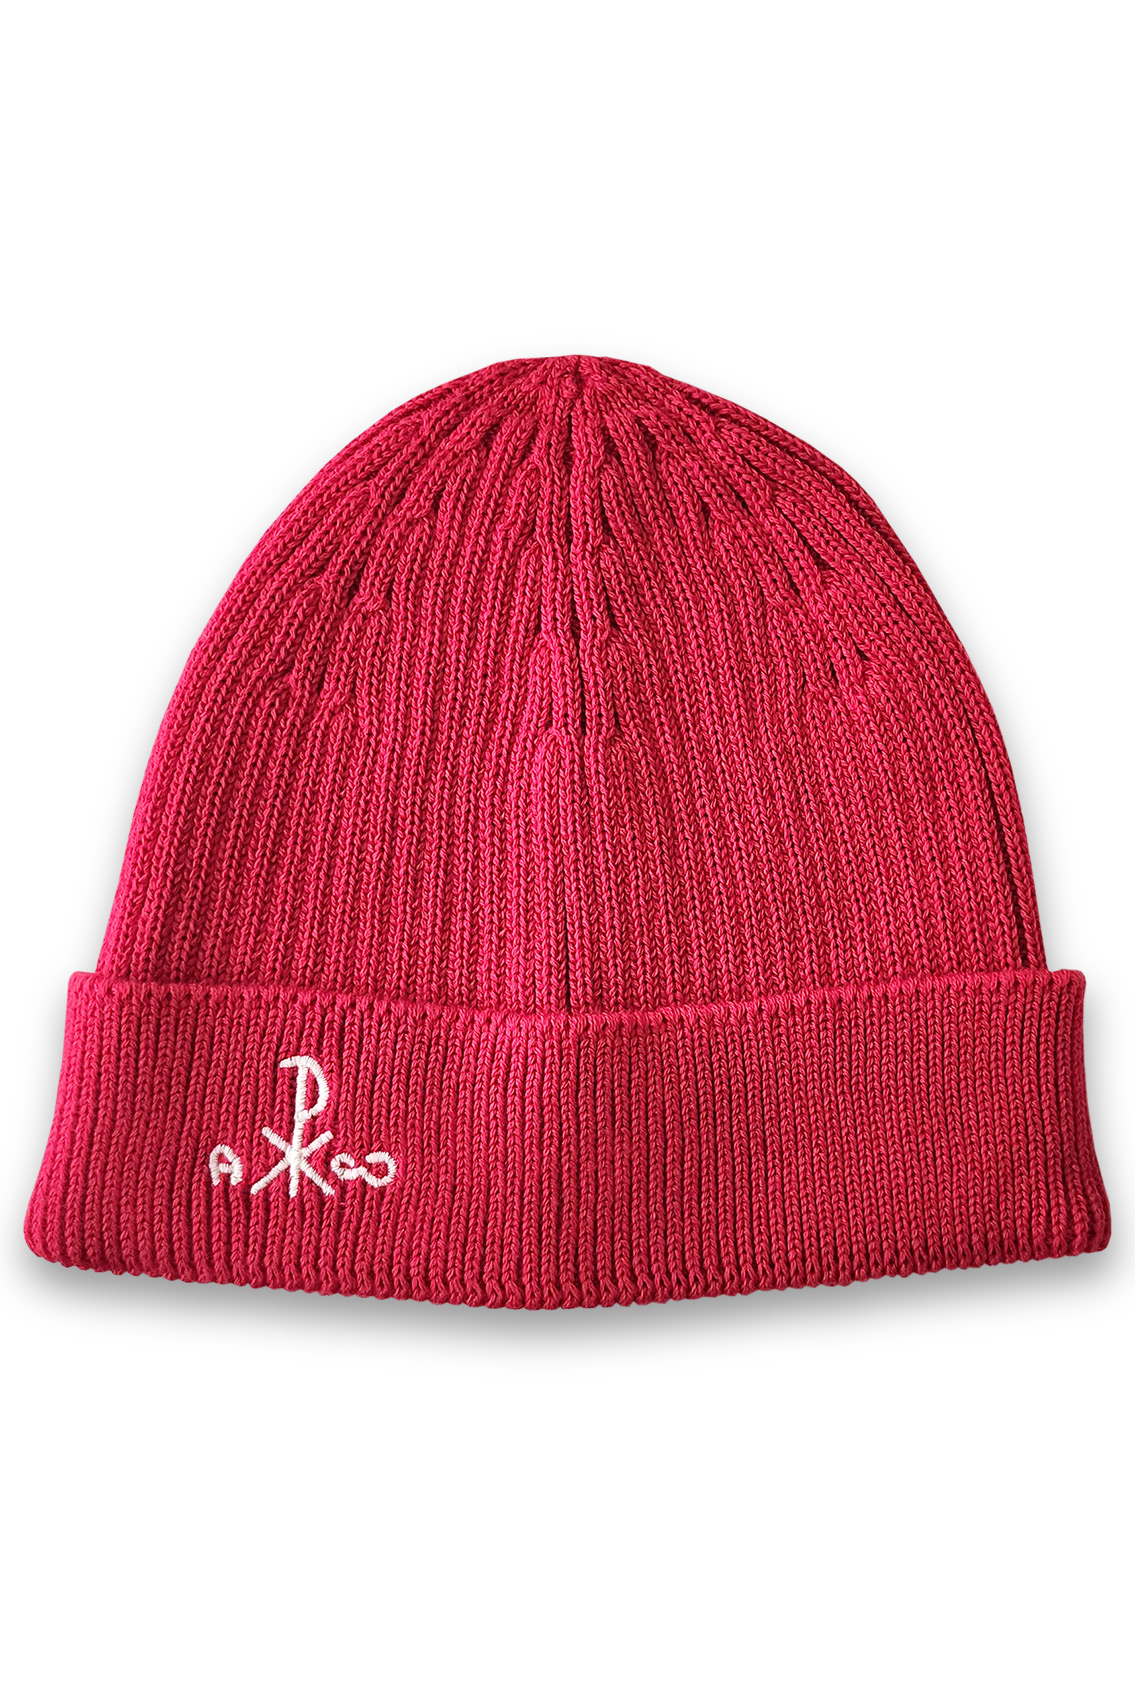 hat with christogram red